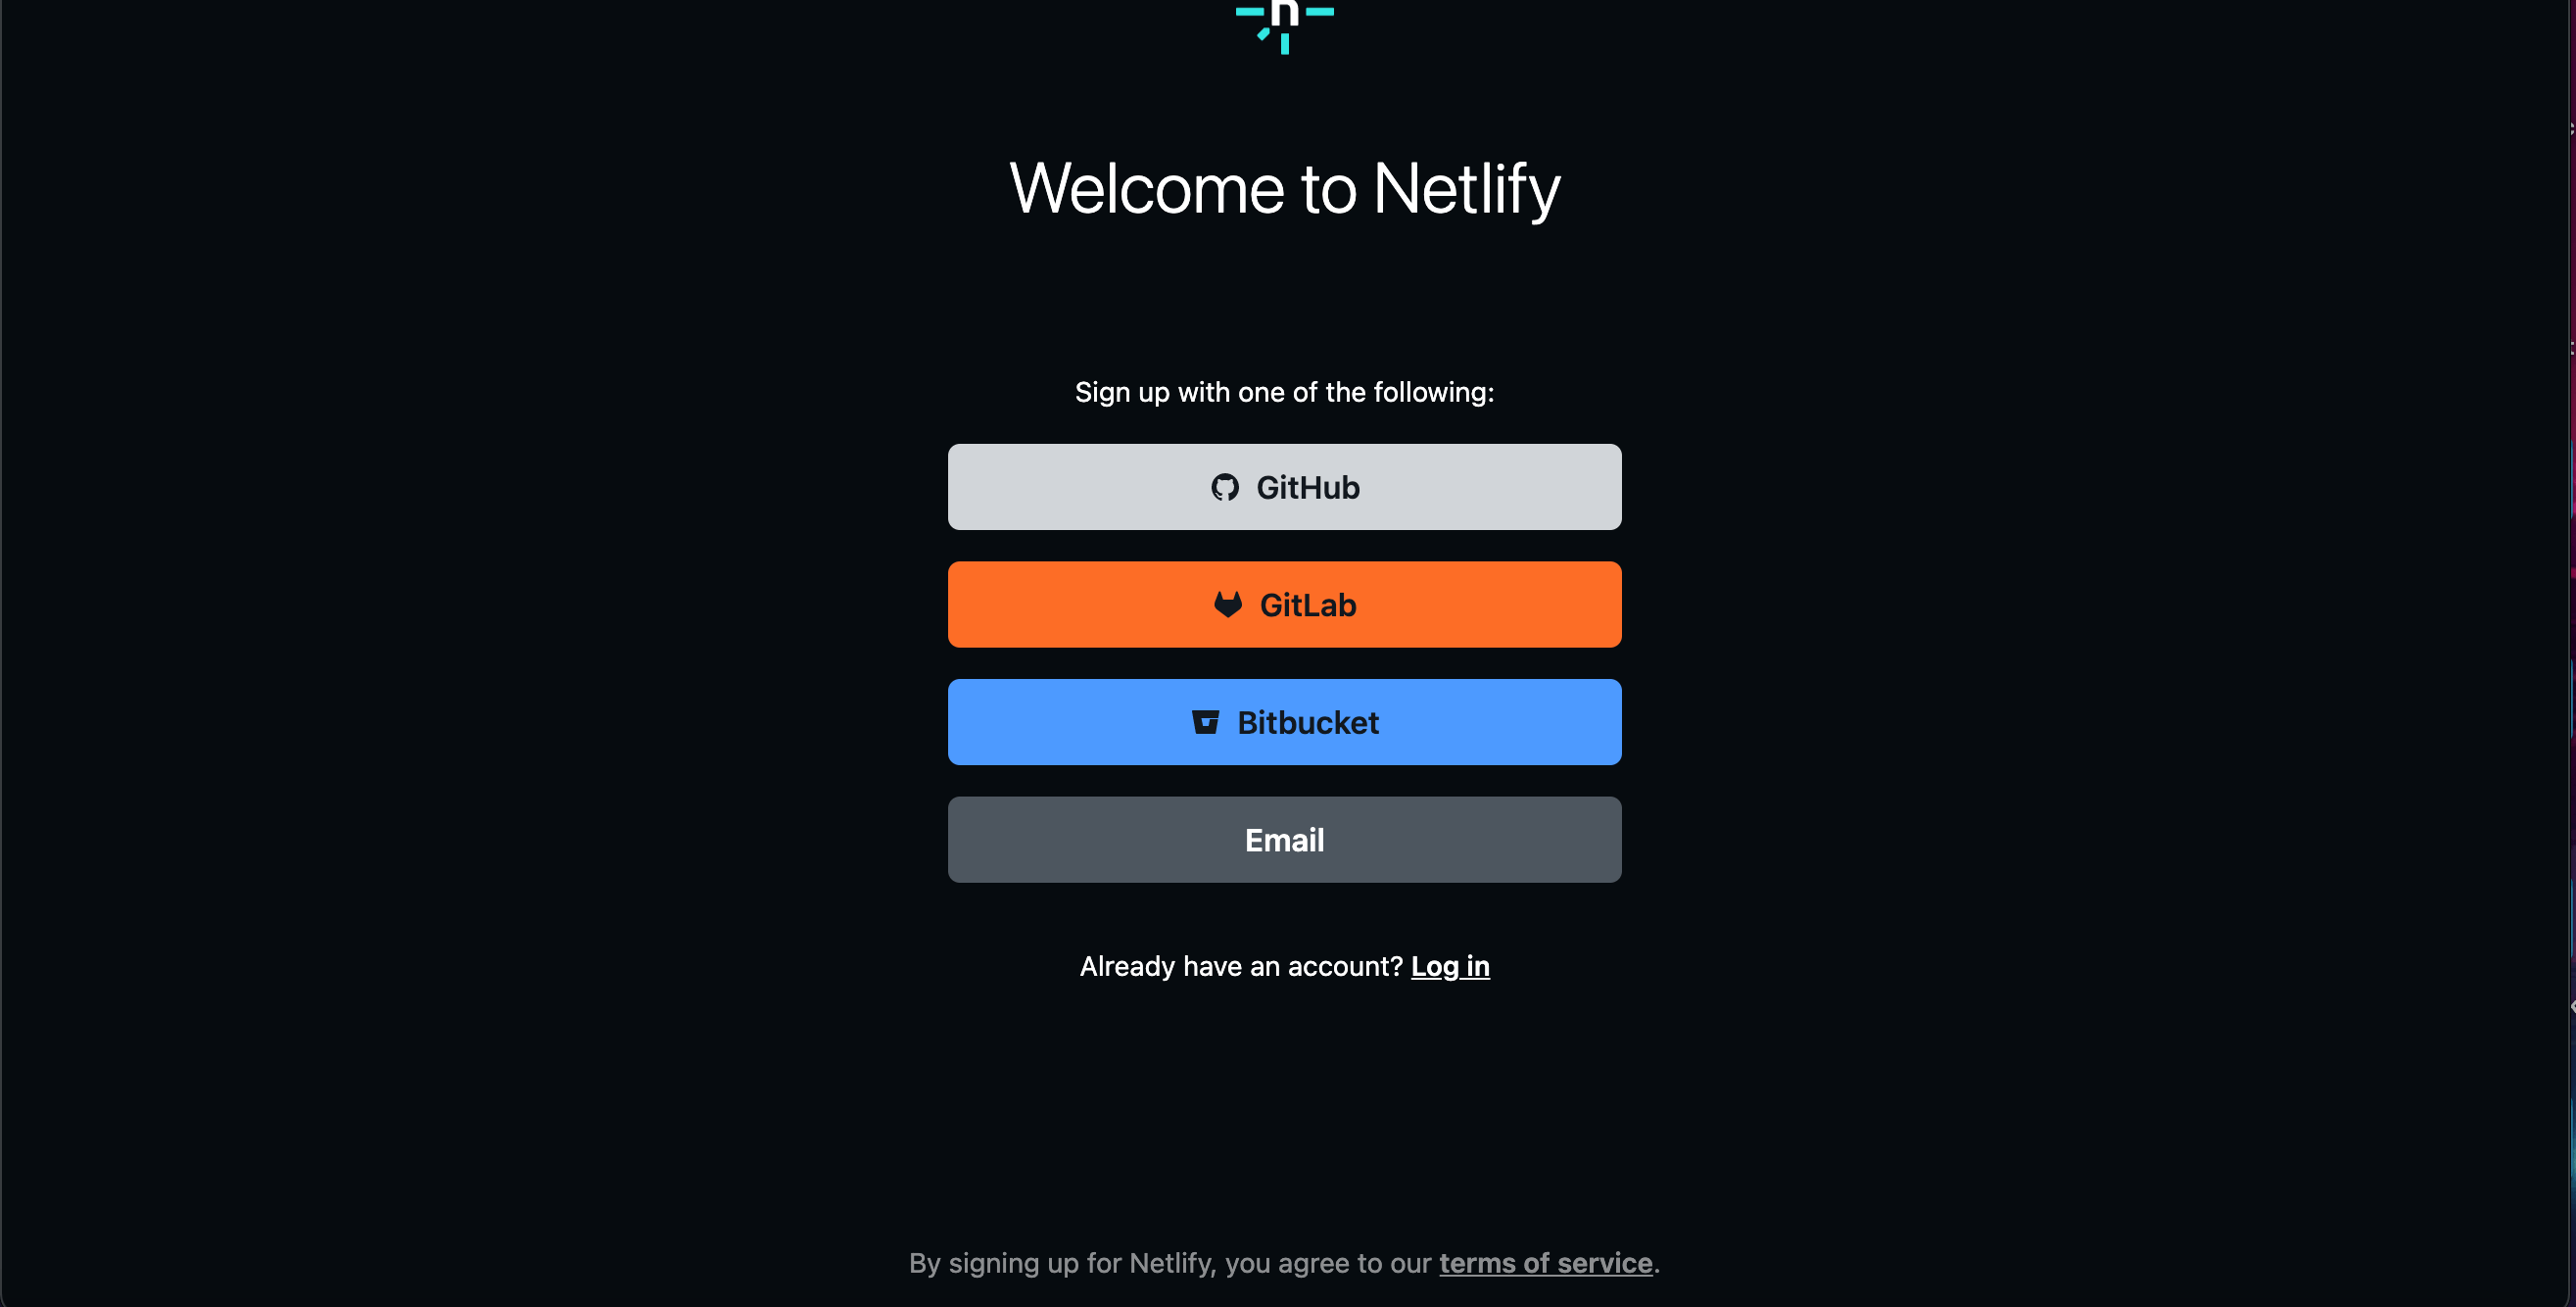 Netlify welcome screen allows you to sign up with GitHub, GitLab, Bitbucket or email.